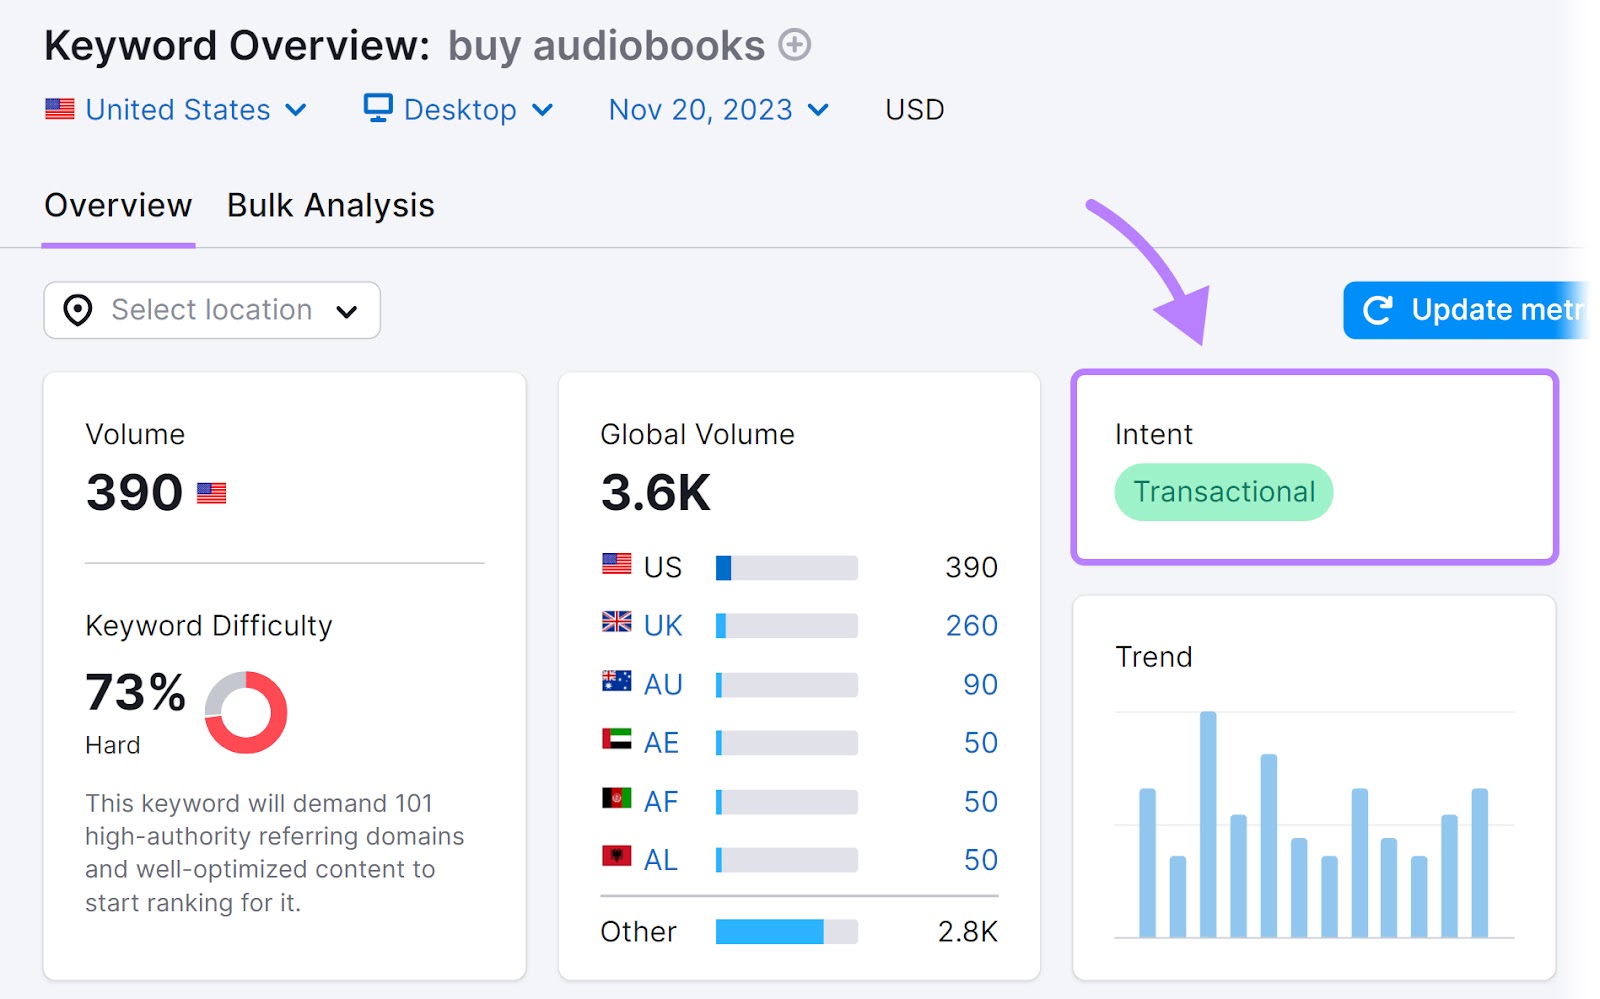 "Intent" widget shows transactional search intent for "buy audiobooks" keyword in Keyword Overview